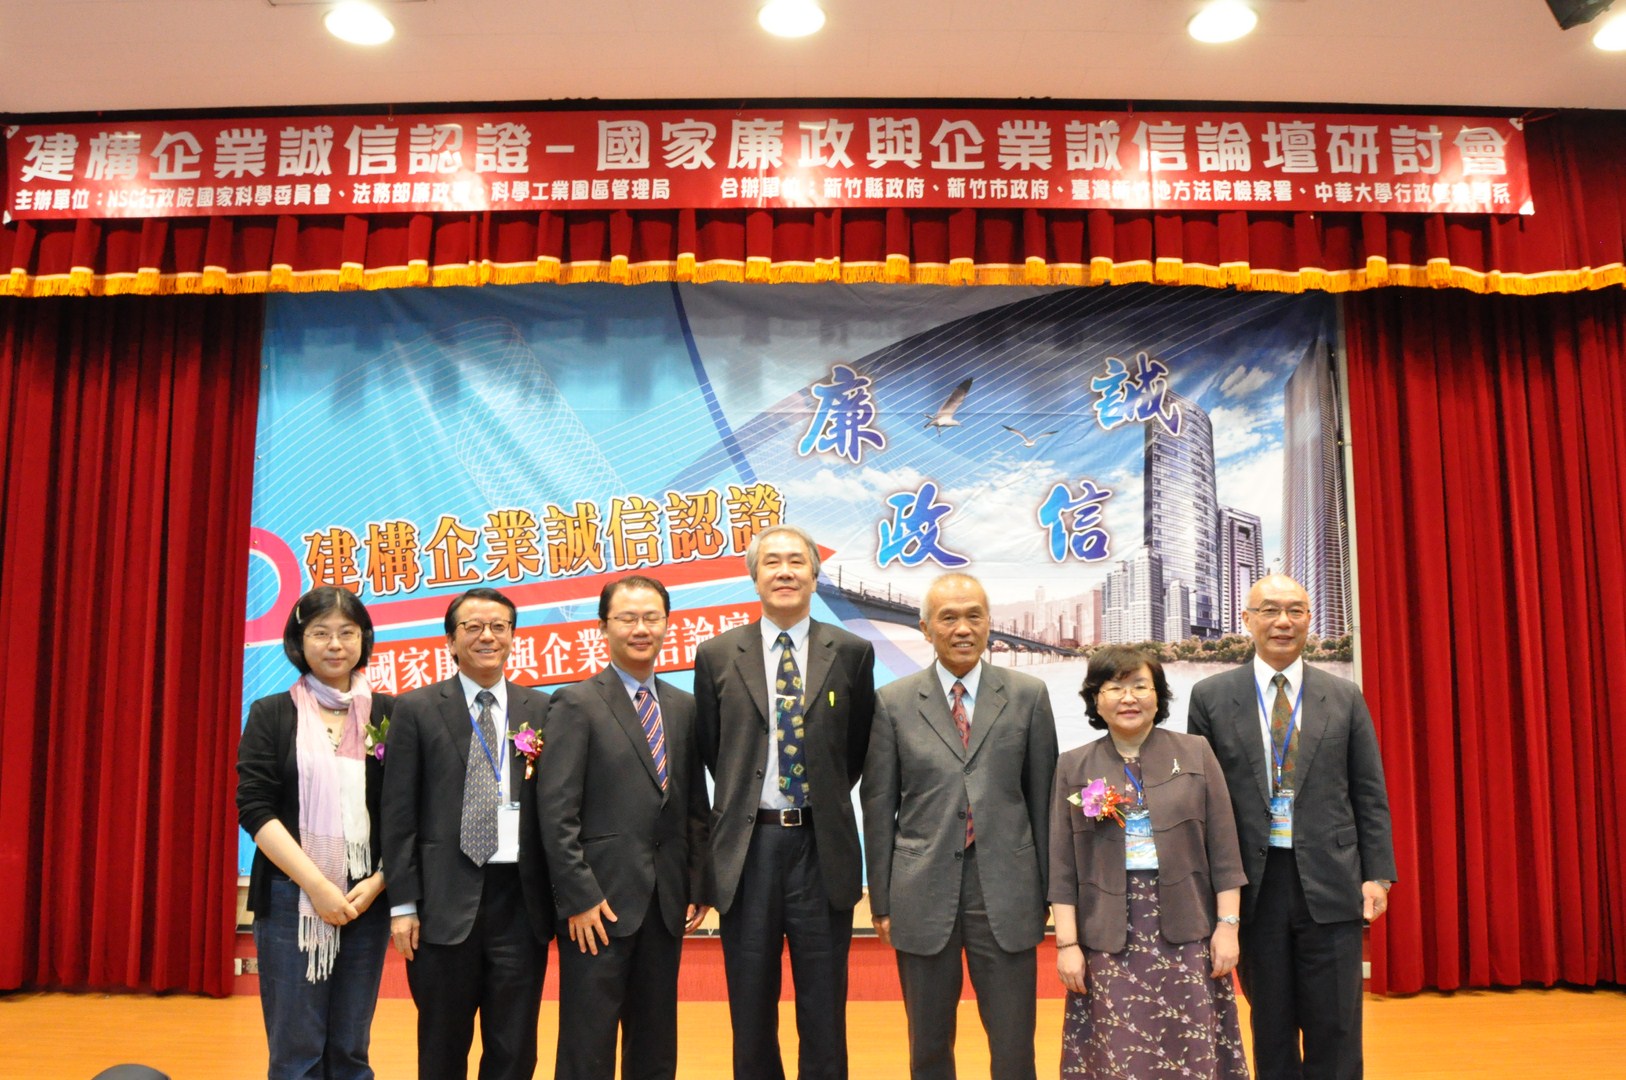 AAC Deputy Director-General YANG, Shih-Chin and participants on the Conference of Construction Certification of Integrity for Corporate. (2012/5/29)